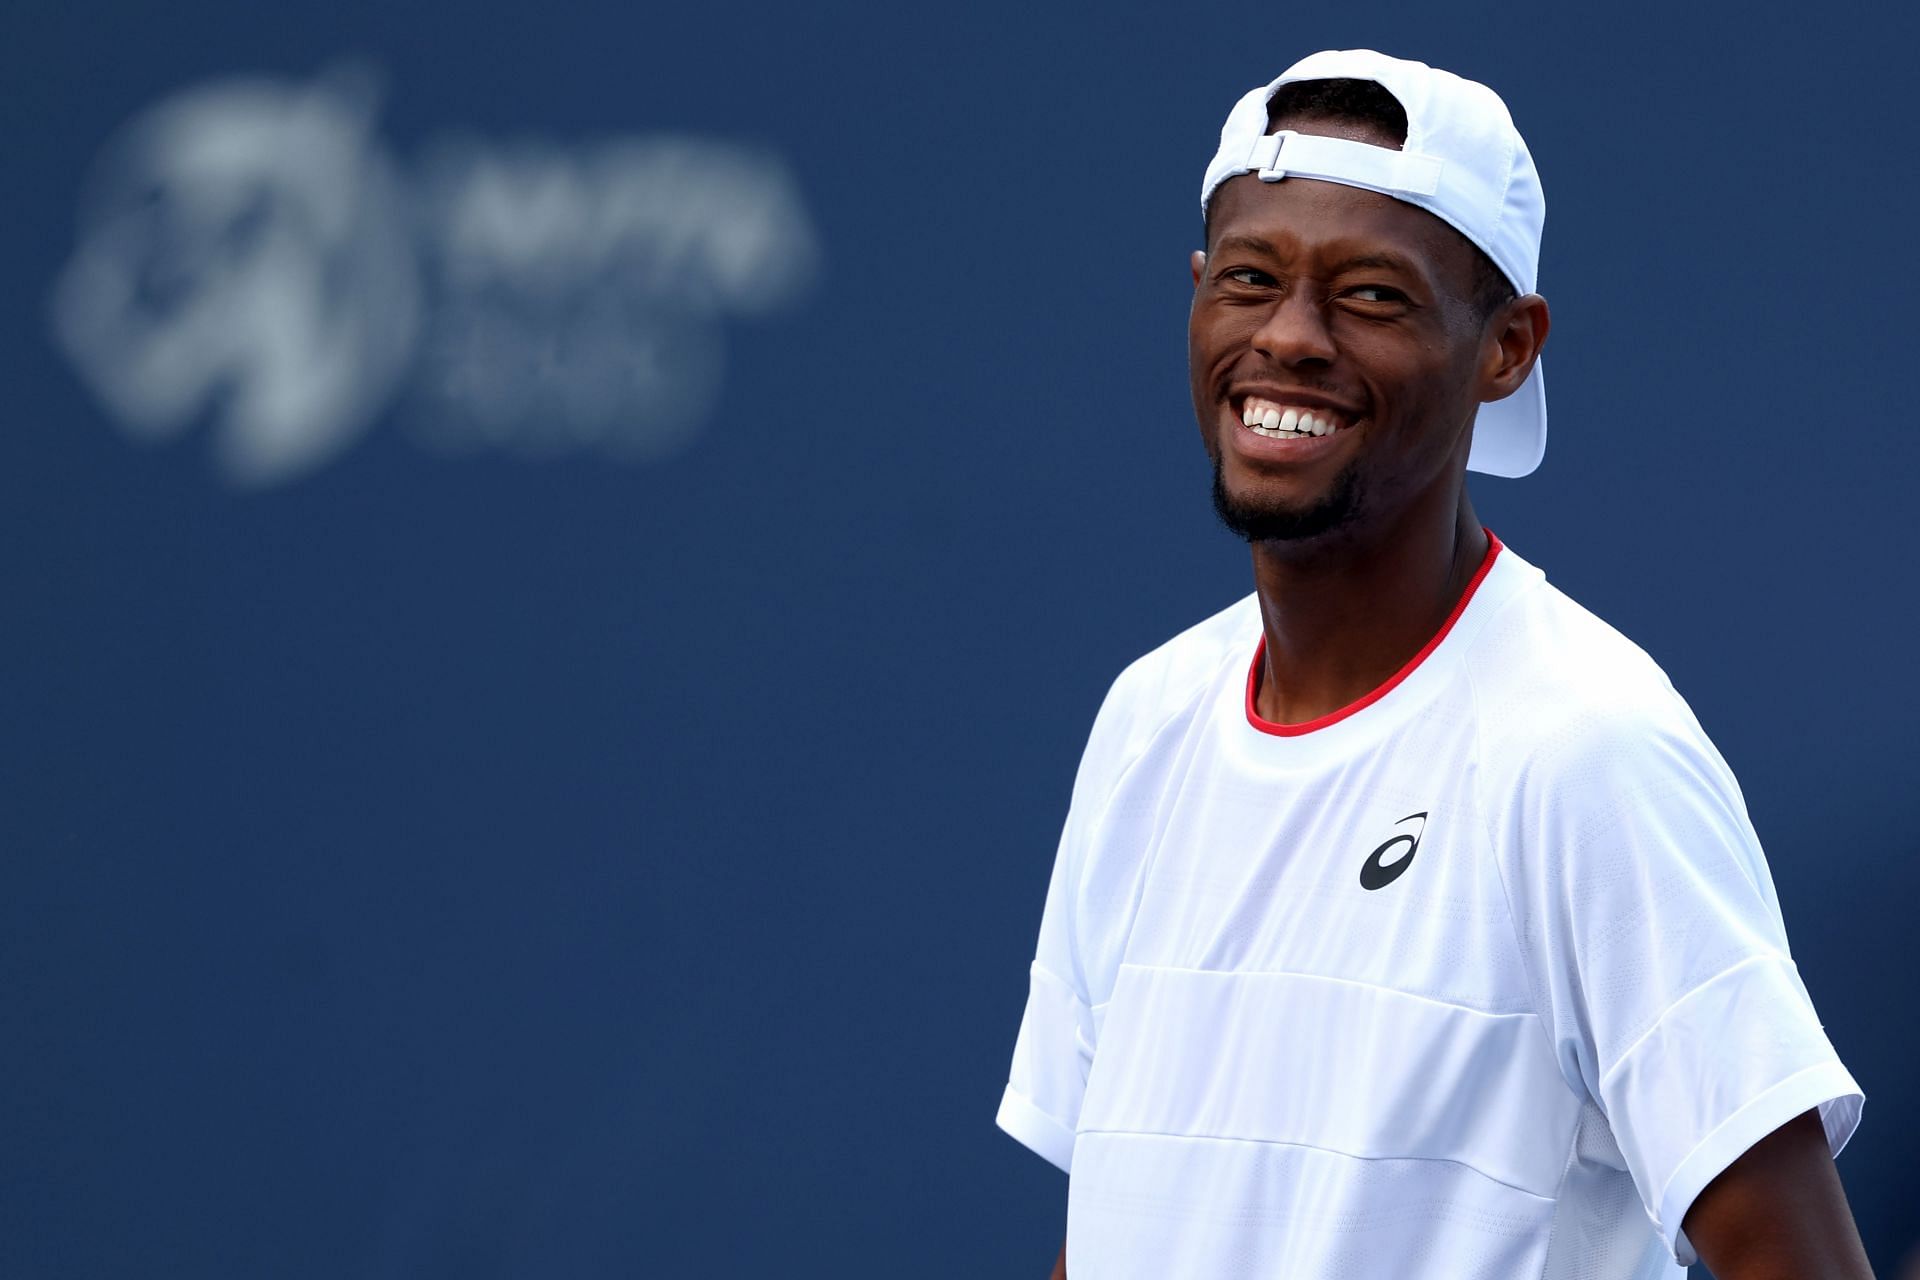 Christopher Eubanks at the 2023 Citi Open.